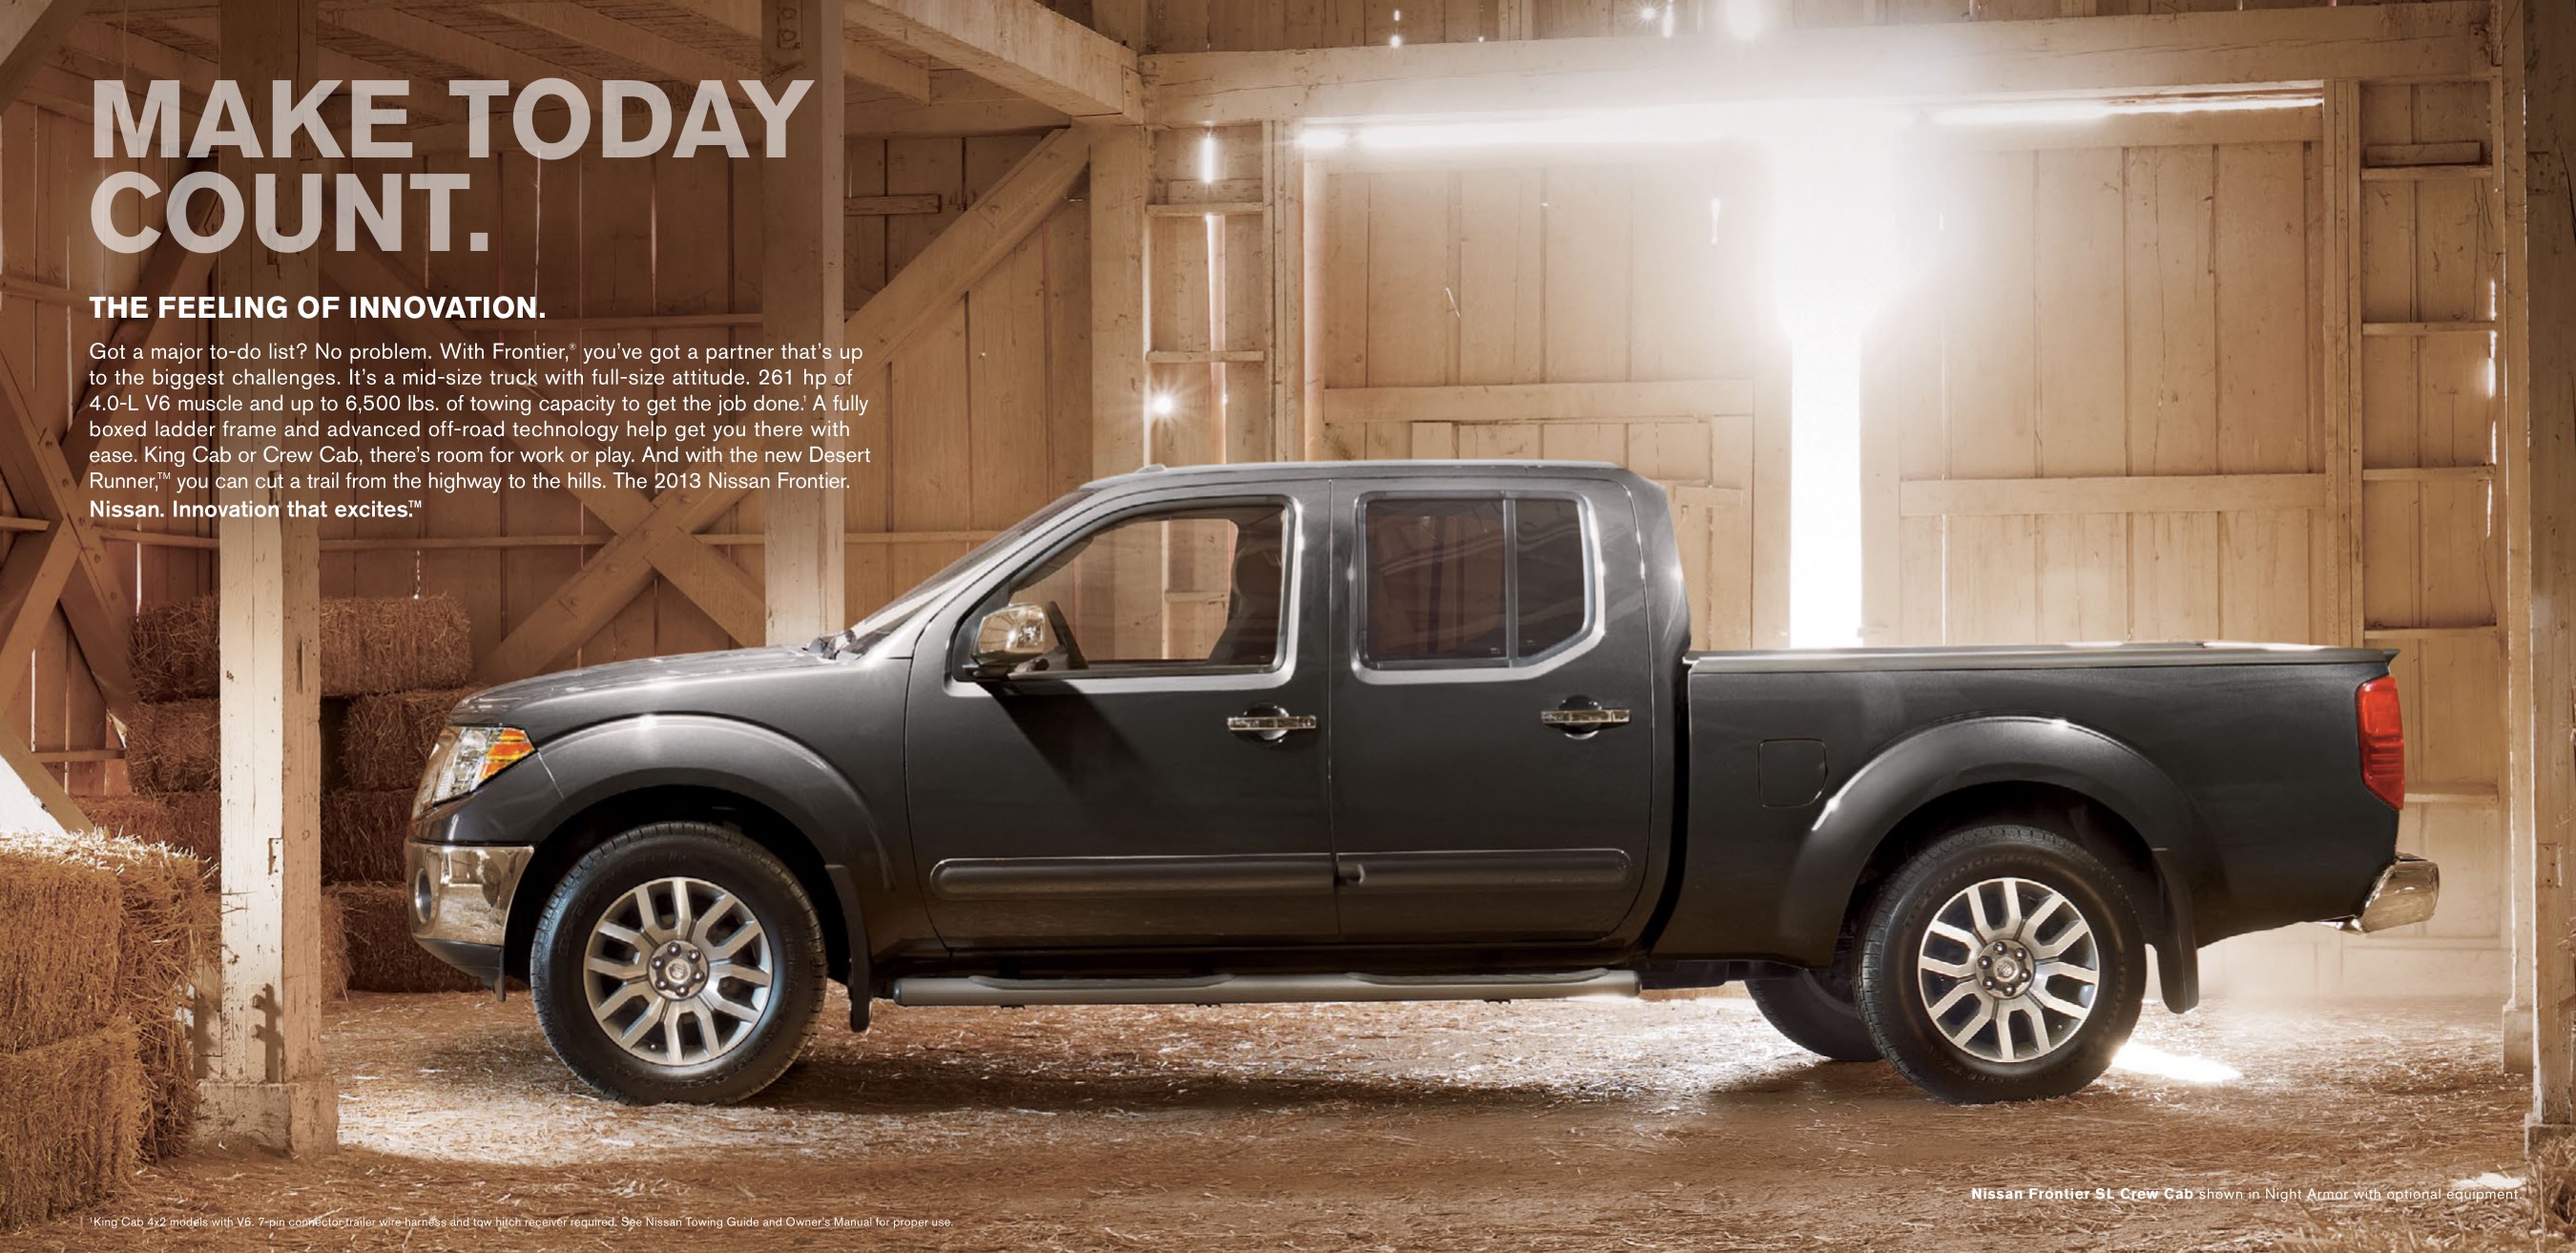 2013 Nissan Frontier Brochure Page 17